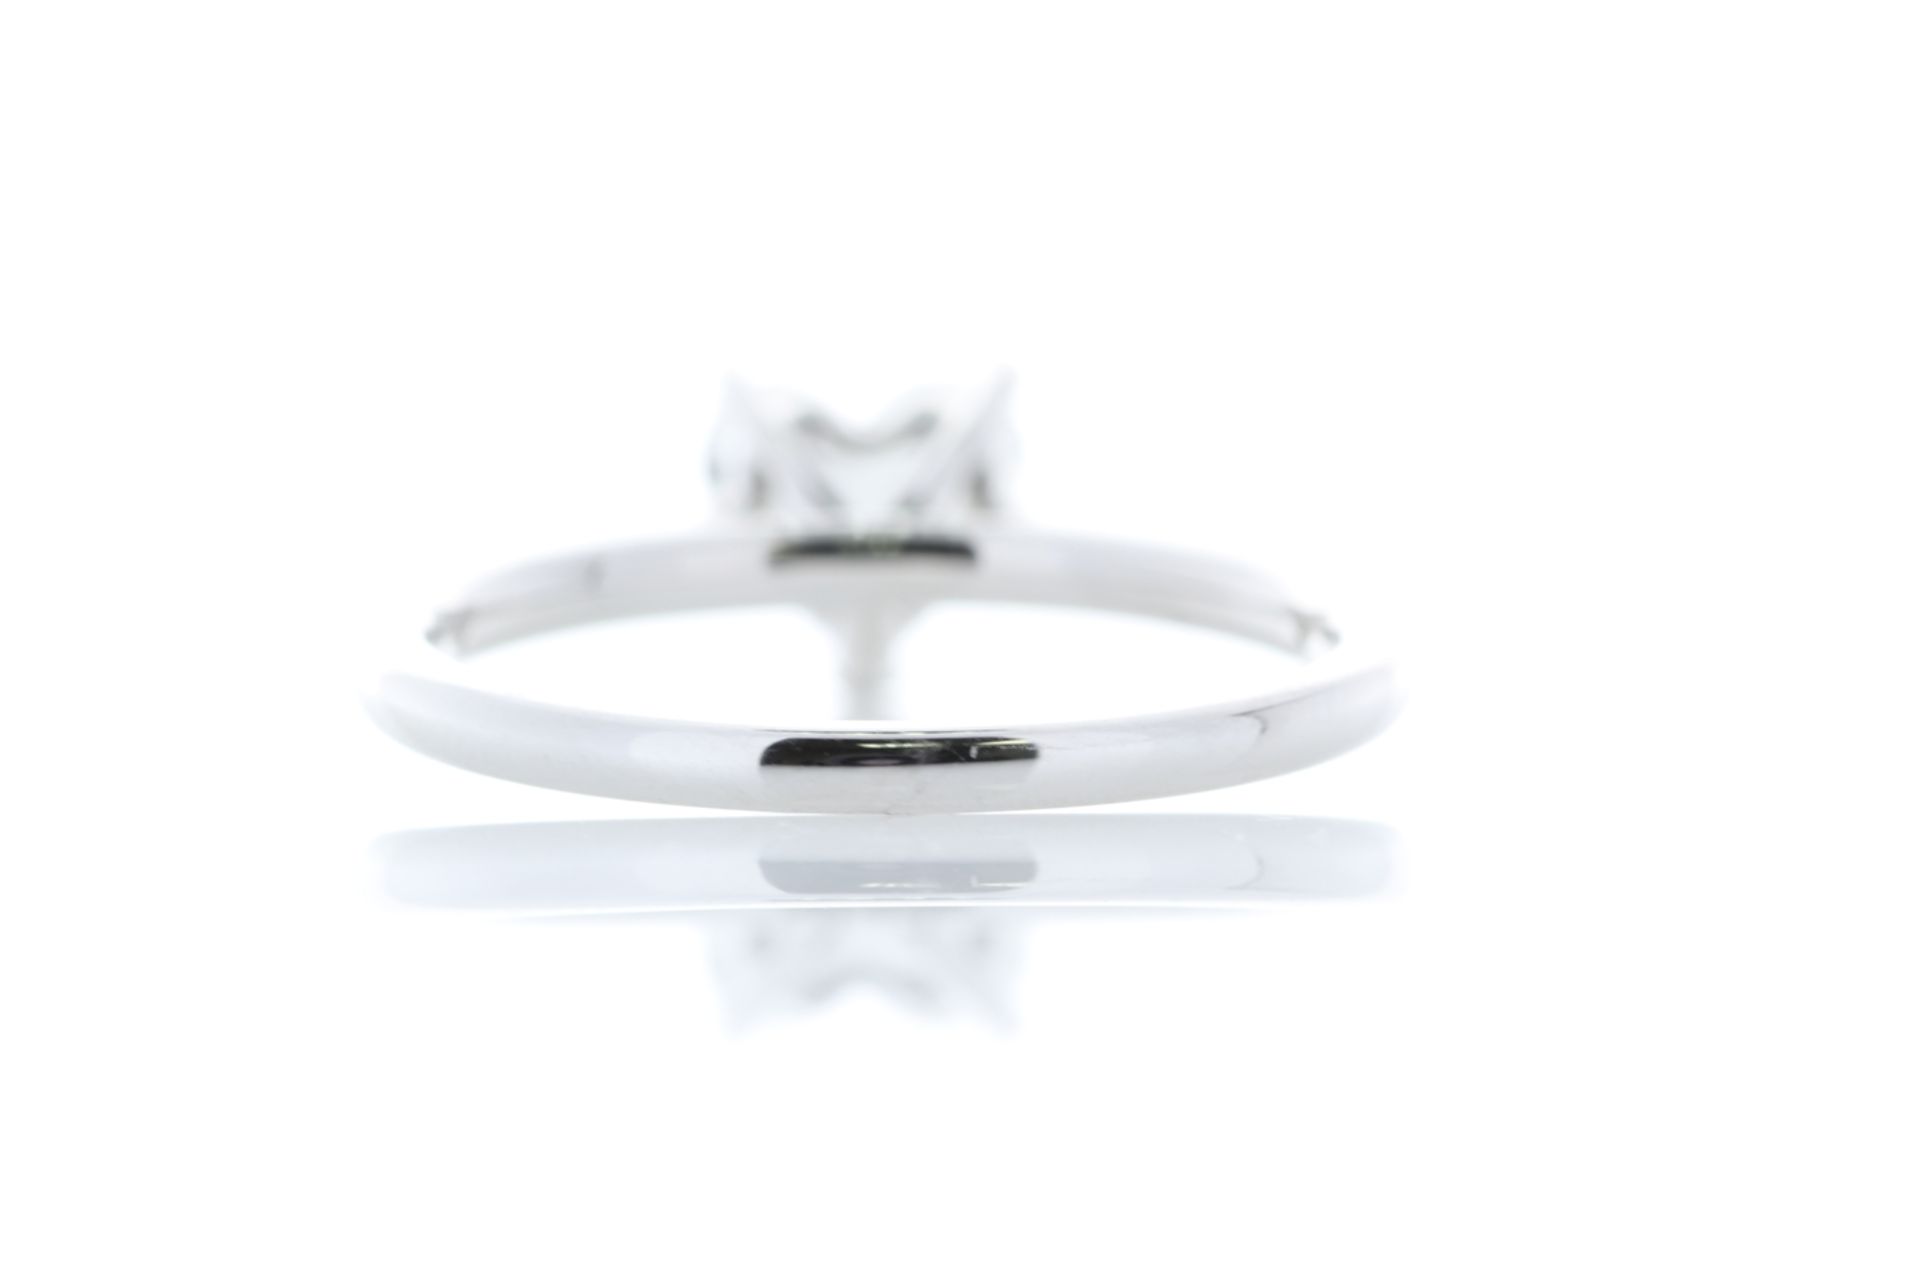 18ct White Gold Single Stone Heart Cut With Stone Set Shoulders Diamond Ring (1.00) 1.17 Carats - Image 3 of 5